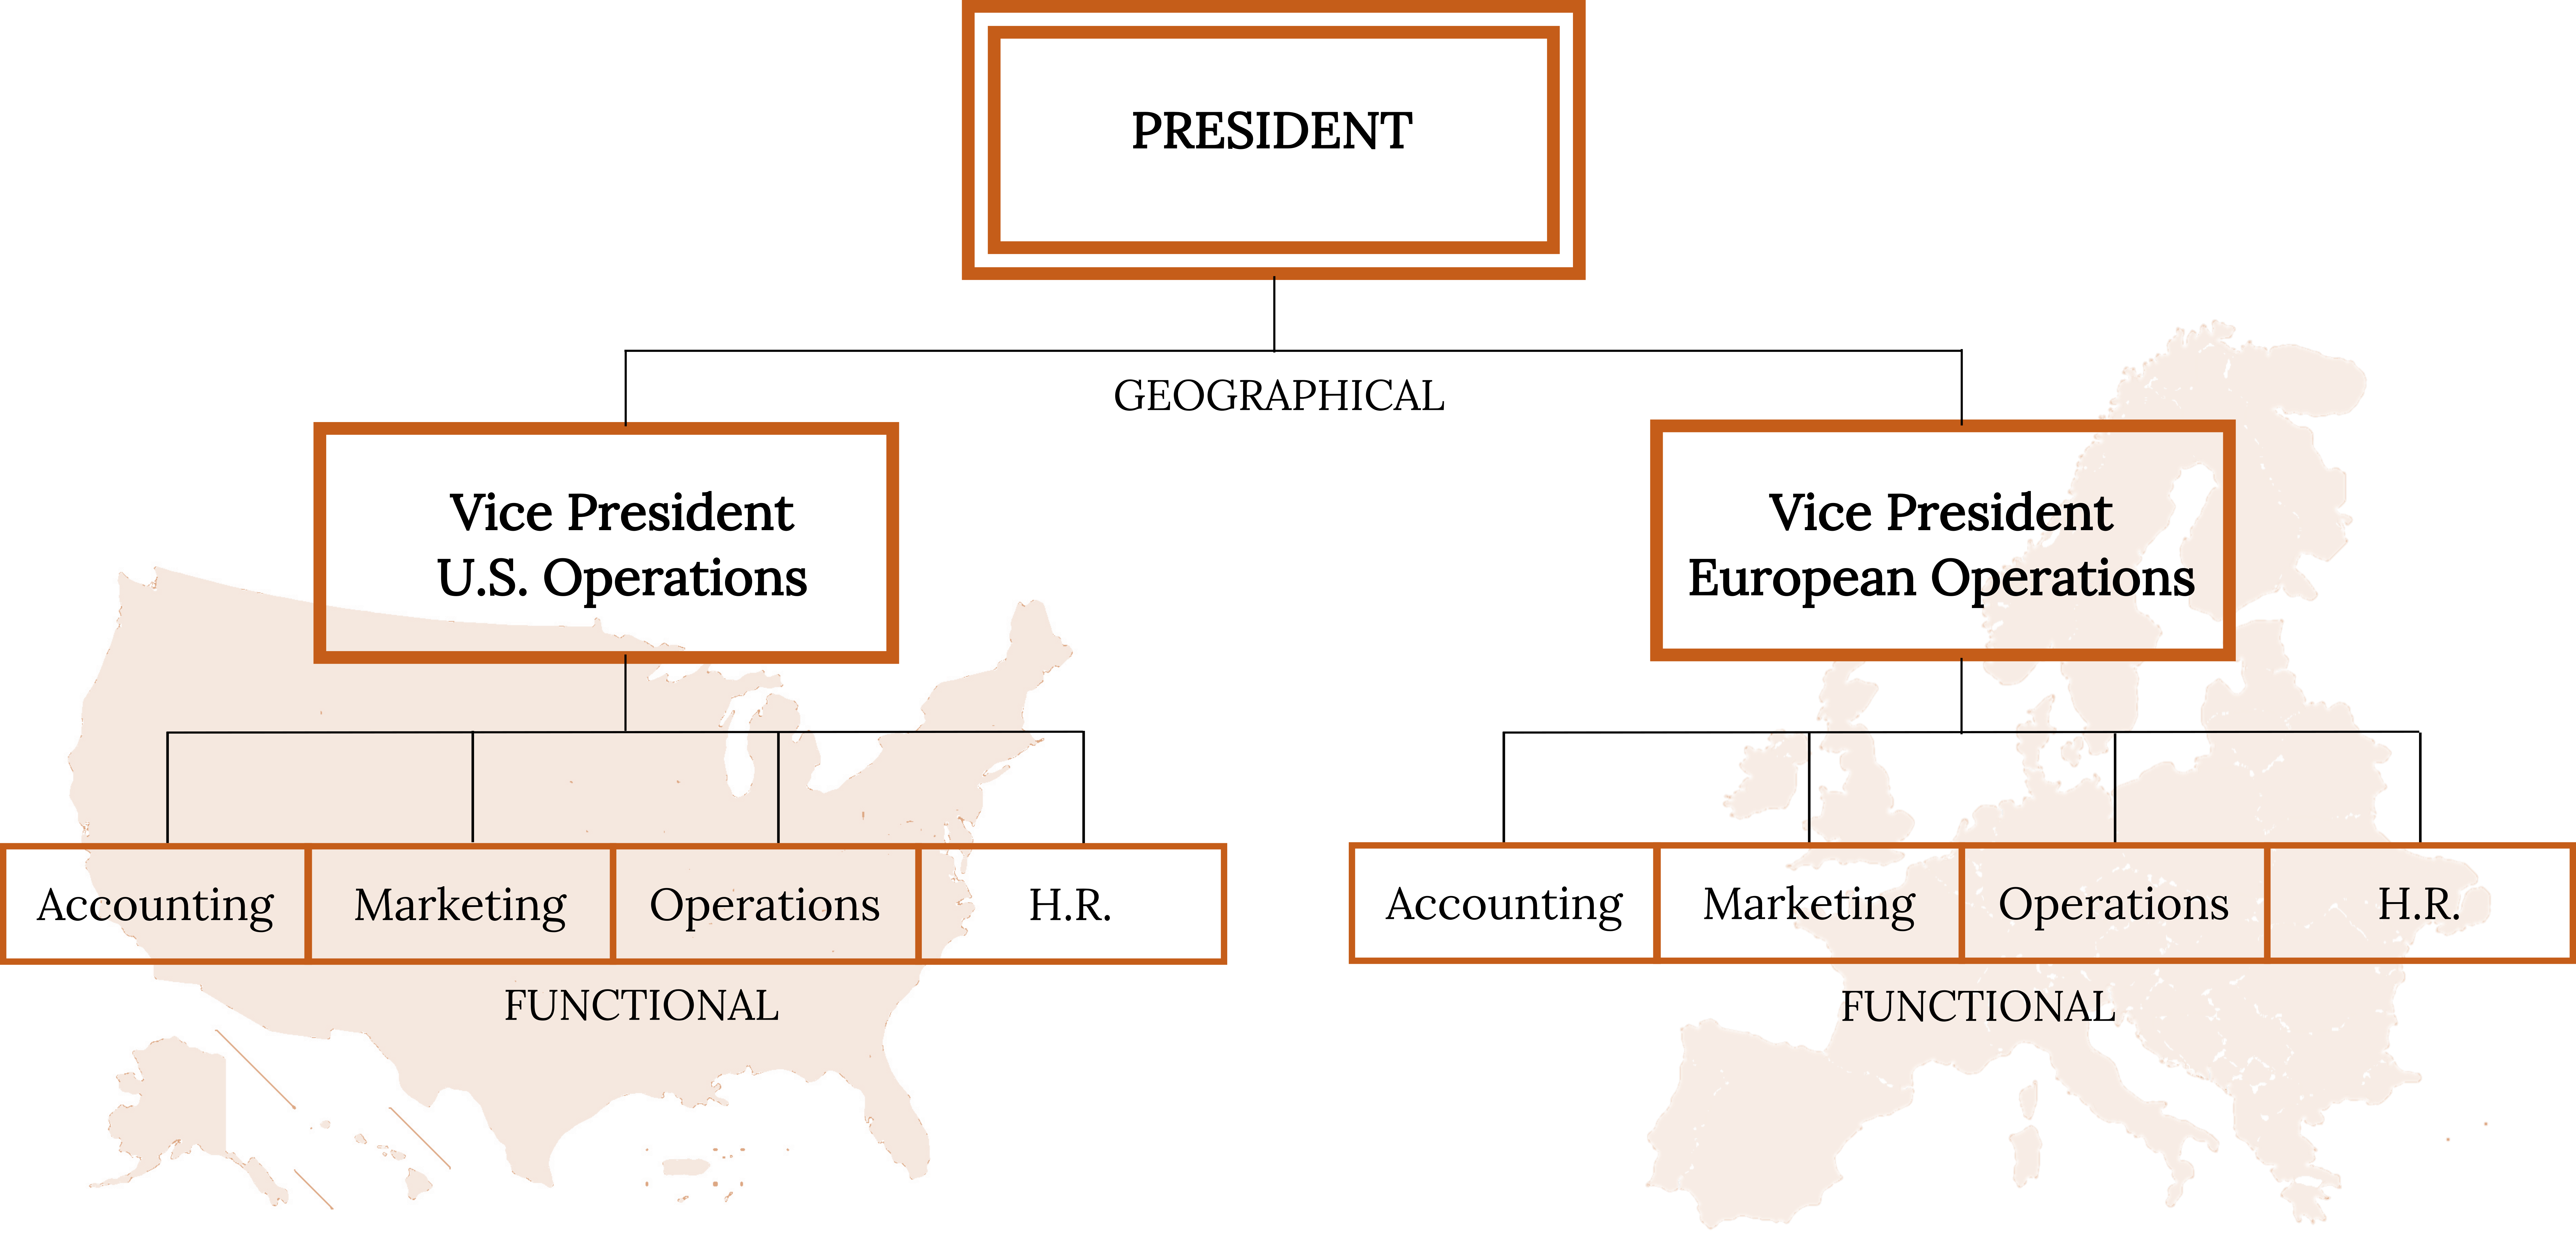 An organizational chart laid over a world map, with the left arm overlaid on a map of the United States and the right arm overlaid on a map of Europe. At the top of the chart is the President. The two arms under the President are labeled “Geographical.” The left arm begins with the Vice President of U.S. Operations. Underneath are four departments: Accounting, Marketing, Operations, and Human Resources. The right arm begins with the Vice President of European Operations. Underneath are four departments: Accounting, Marketing, Operations, and Human Resources. Under the bottom of each arm is labeled “Functional.”